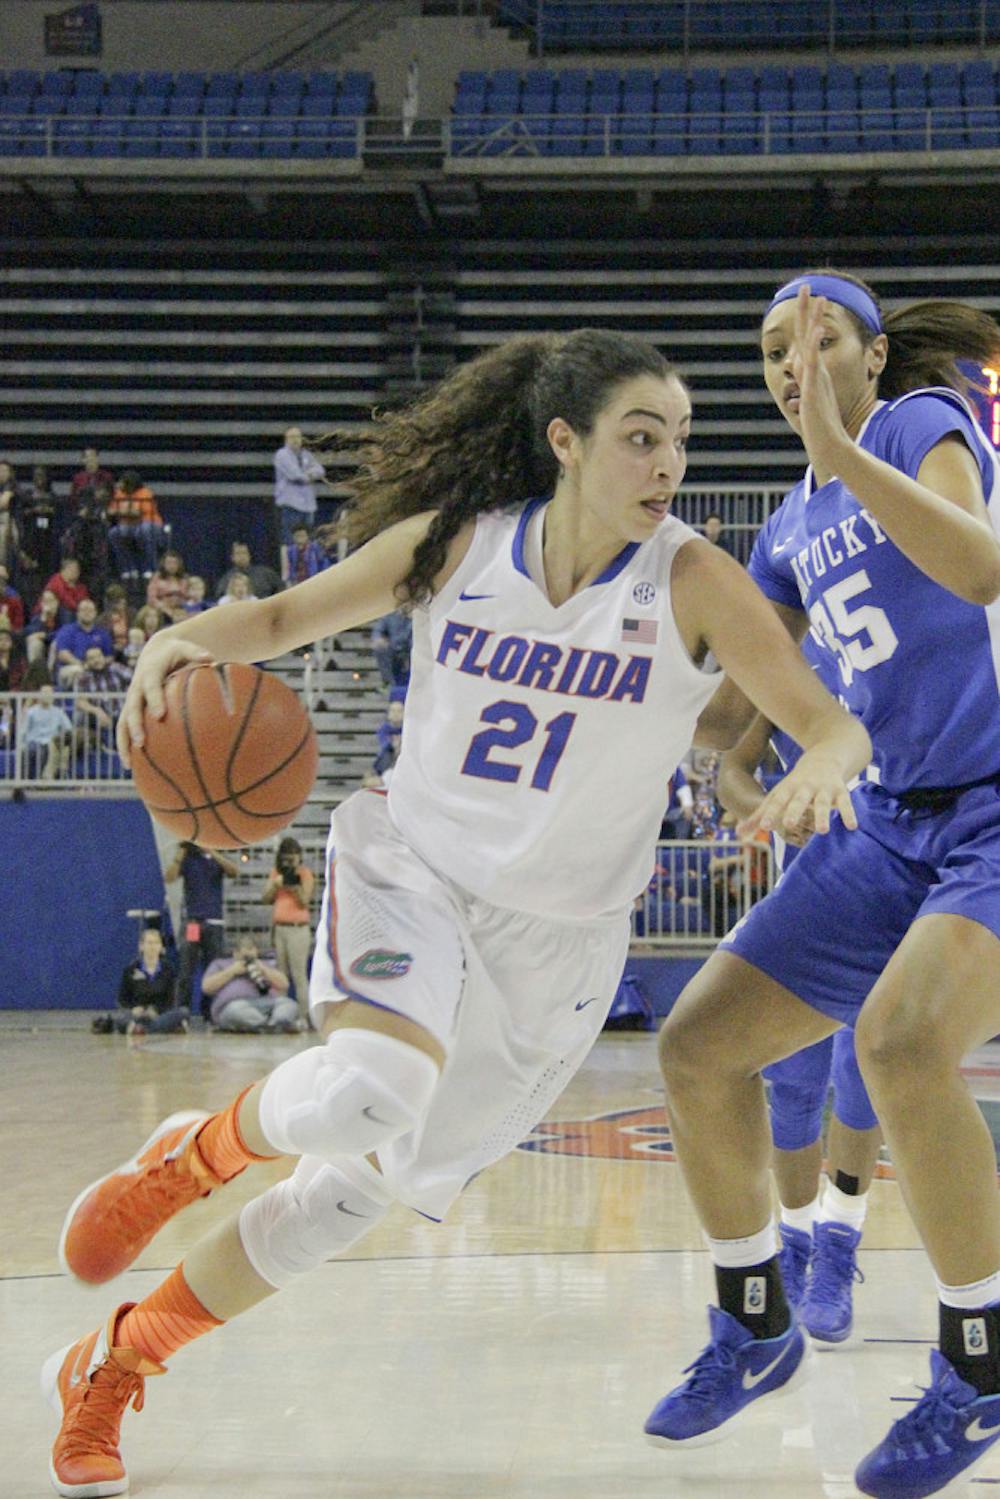 <p>Eleanna Christinaki drives into the paint during Florida's 85-79 win over Kentucky on Jan. 31, 2016, in the O'Connell Center.</p>